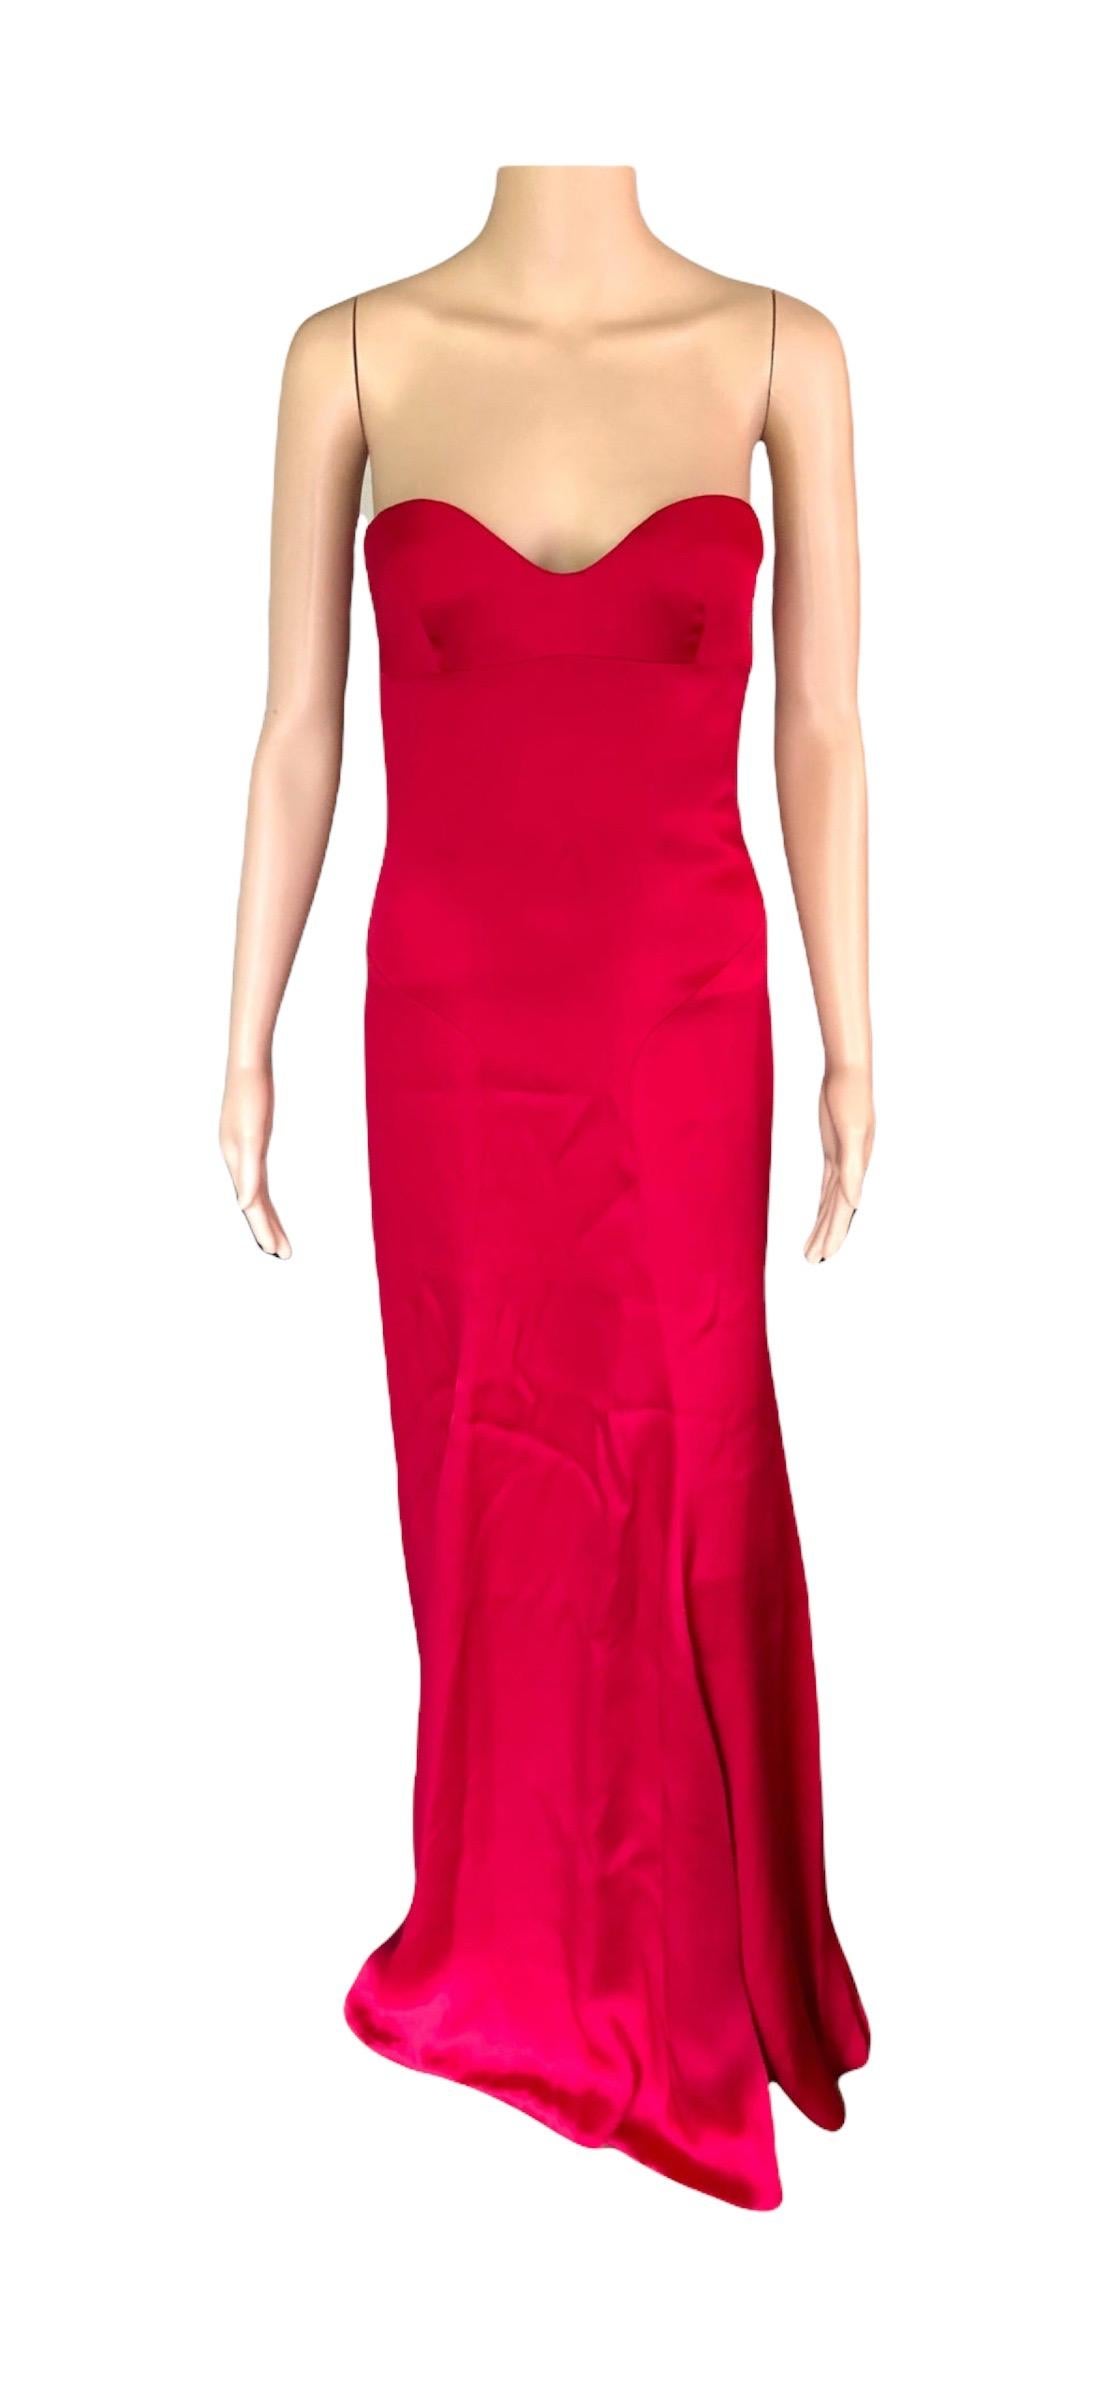 Versace Bustier Corset Satin Red Evening Dress Gown  In Good Condition For Sale In Naples, FL